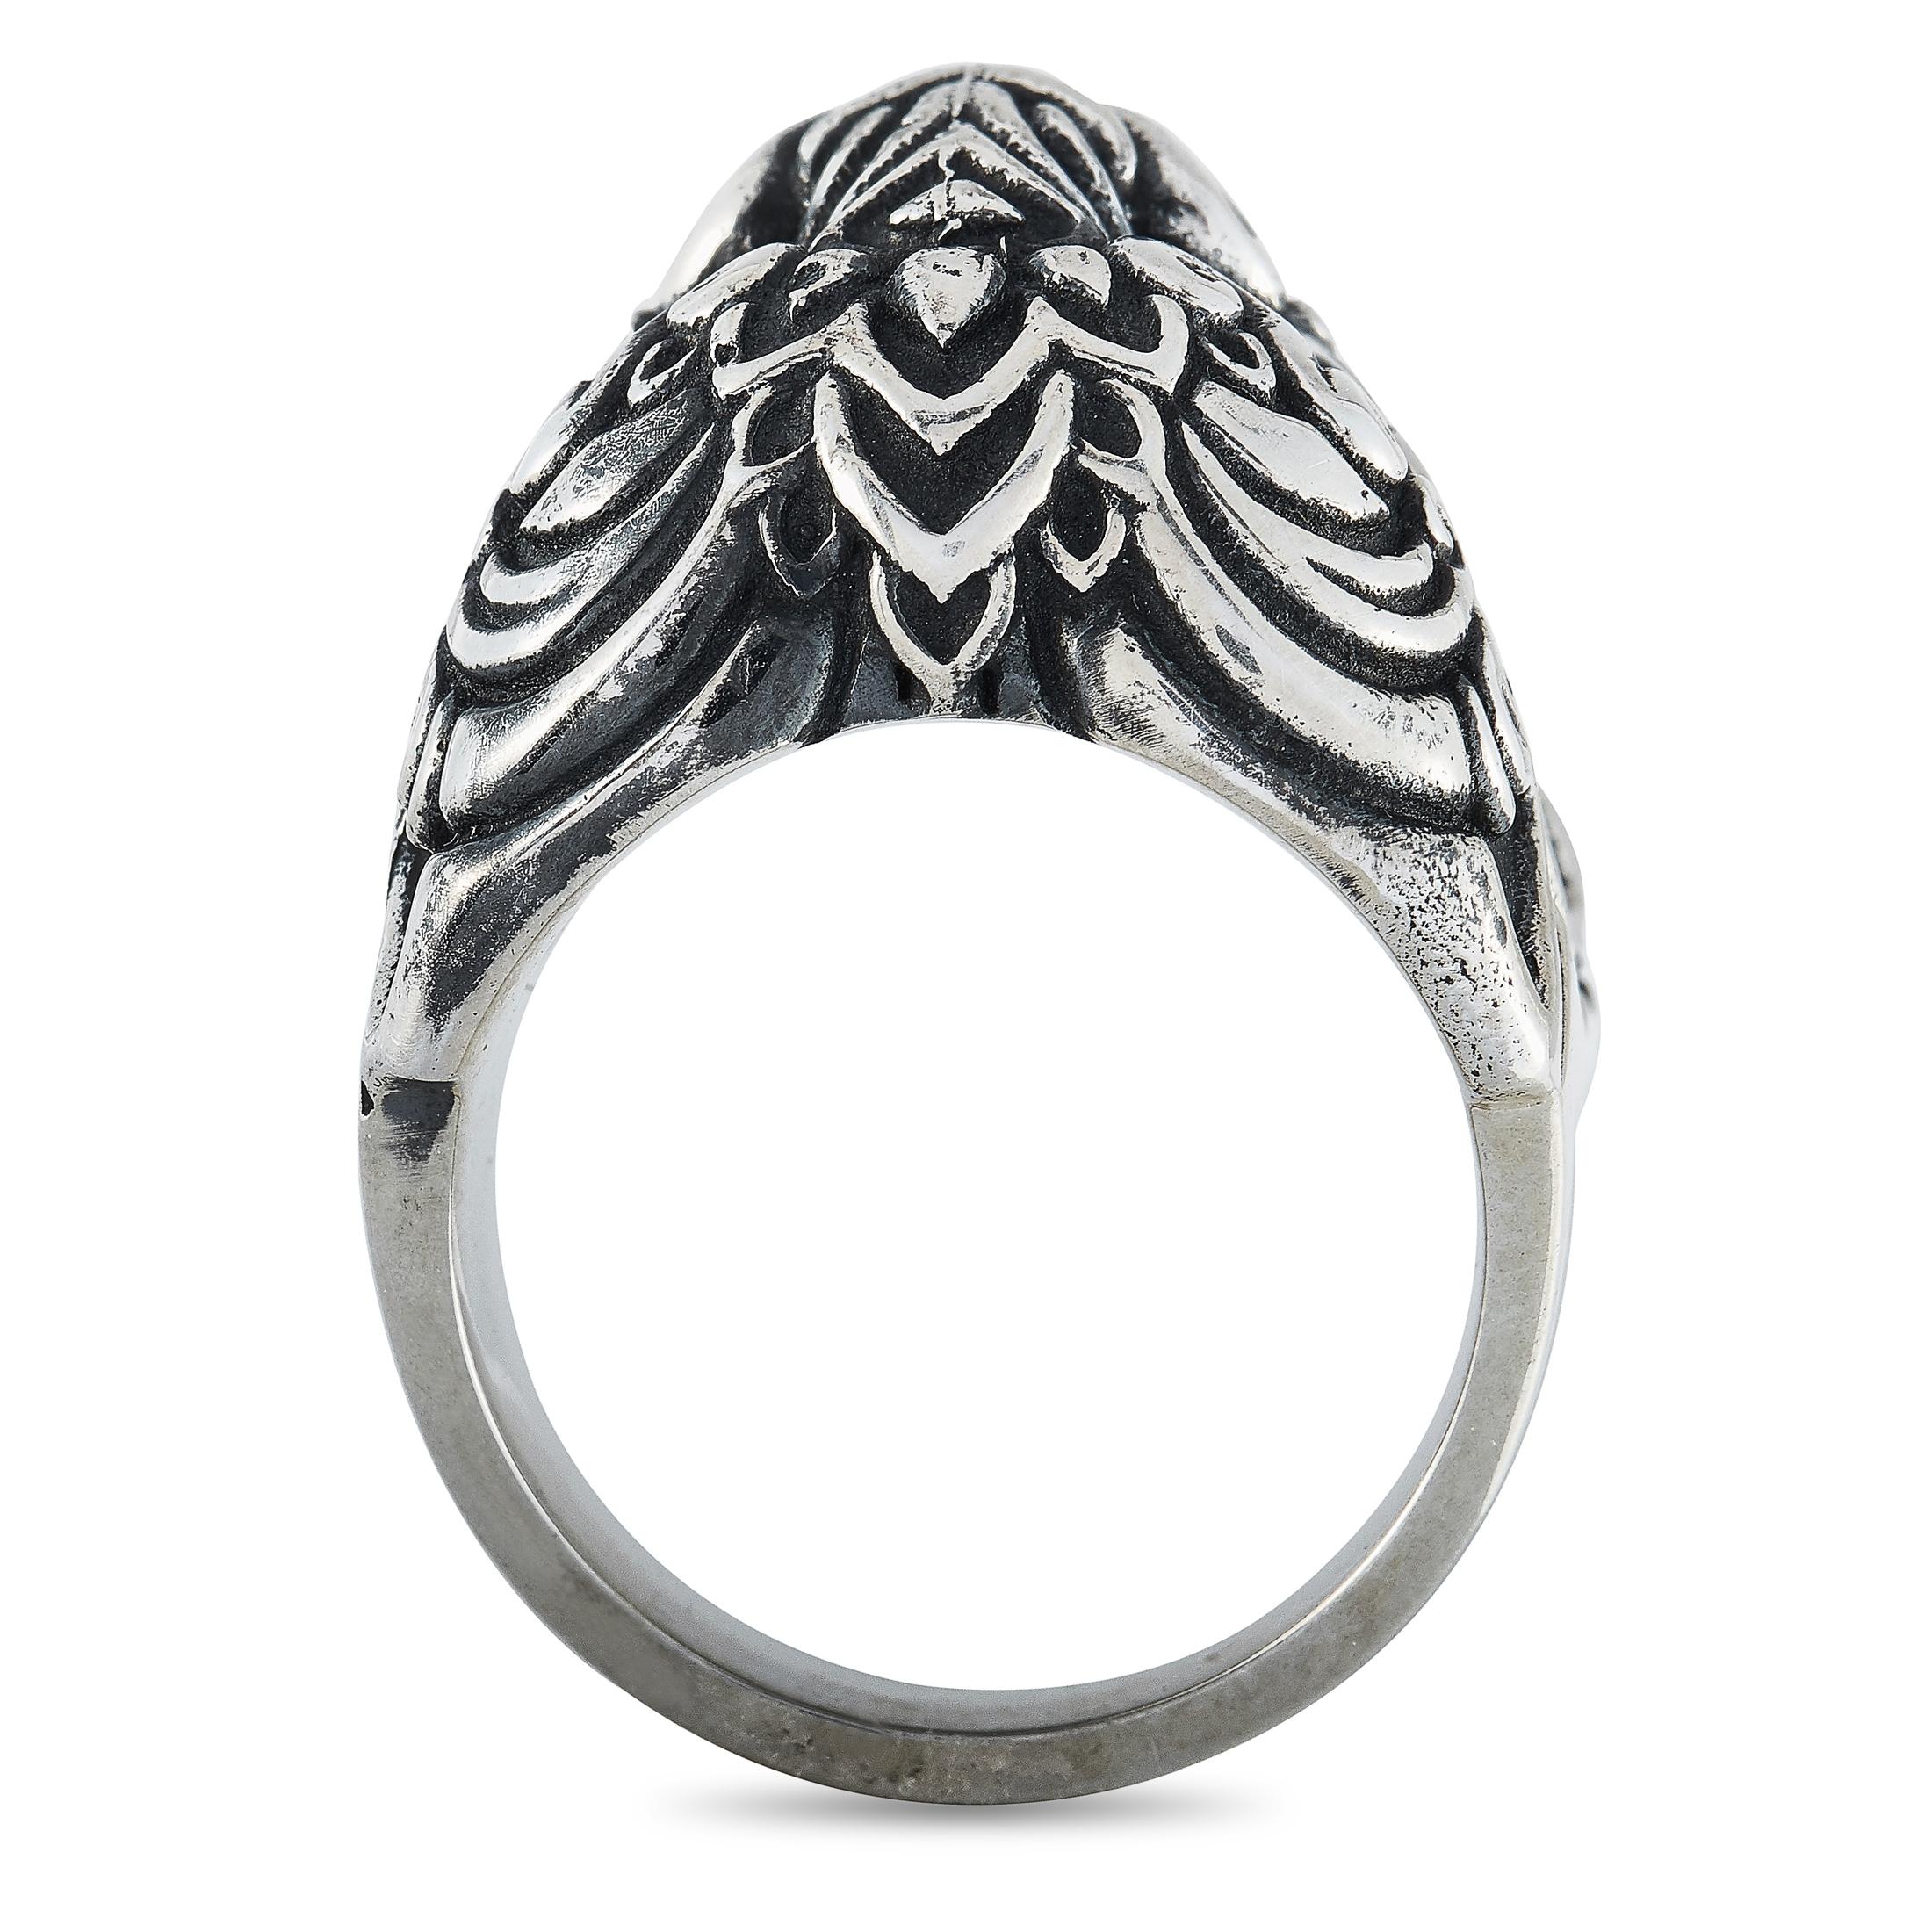 This King Baby ring is crafted from sterling silver and weighs 33.8 grams. The ring boasts band thickness of 5 mm and top height of 10 mm, while top dimensions measure 20 by 20 mm.

Offered in brand new condition, this jewelry piece includes the